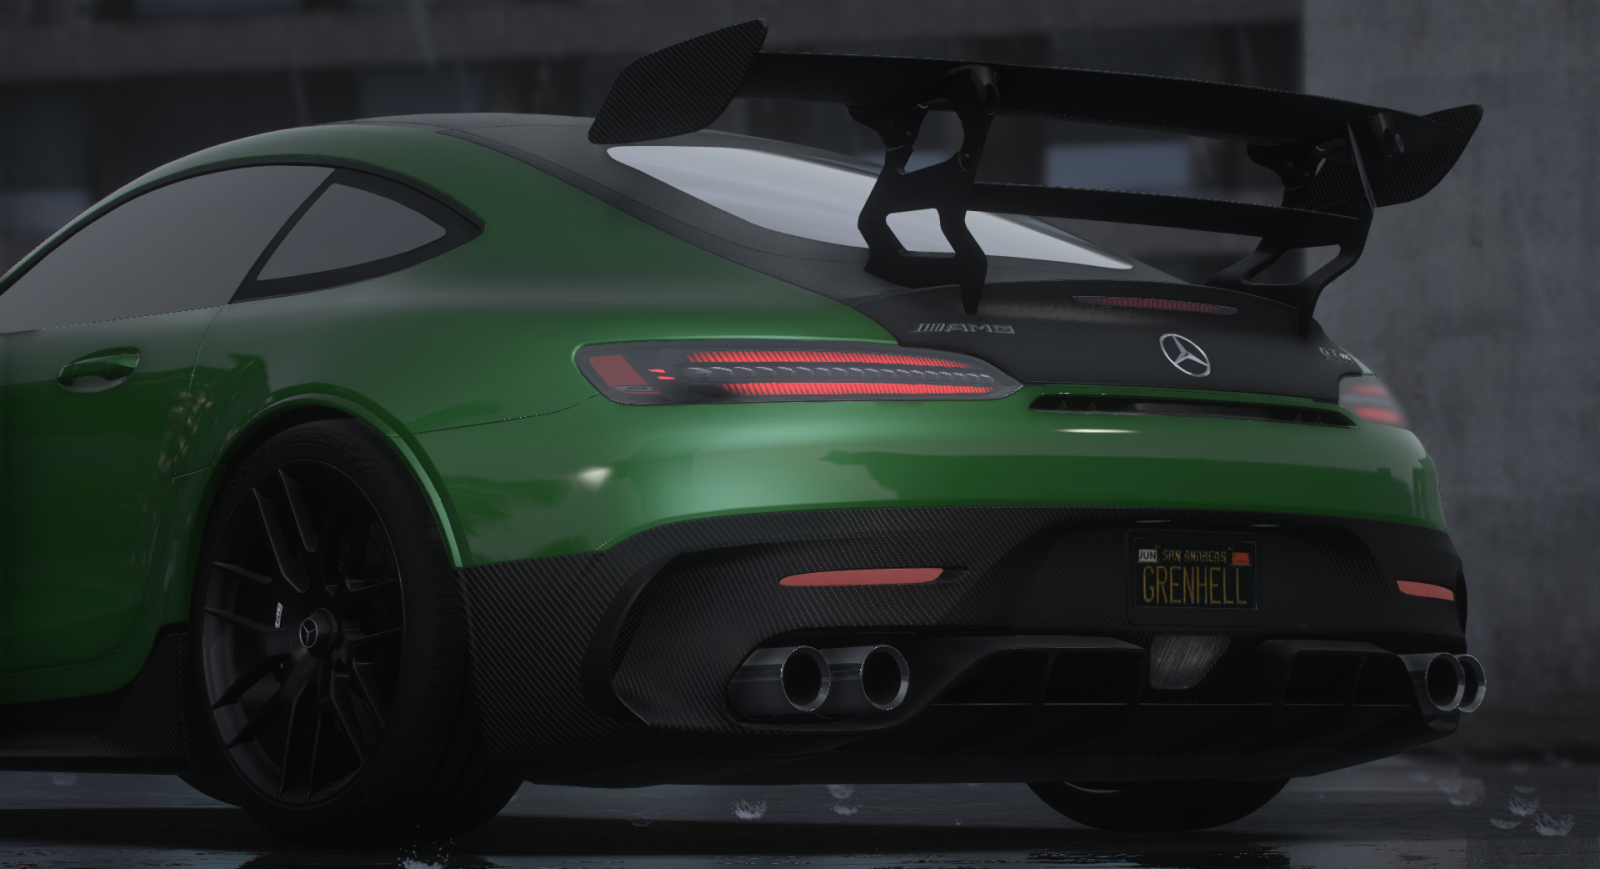 AMG GT BS "Green Hell Magno" 4